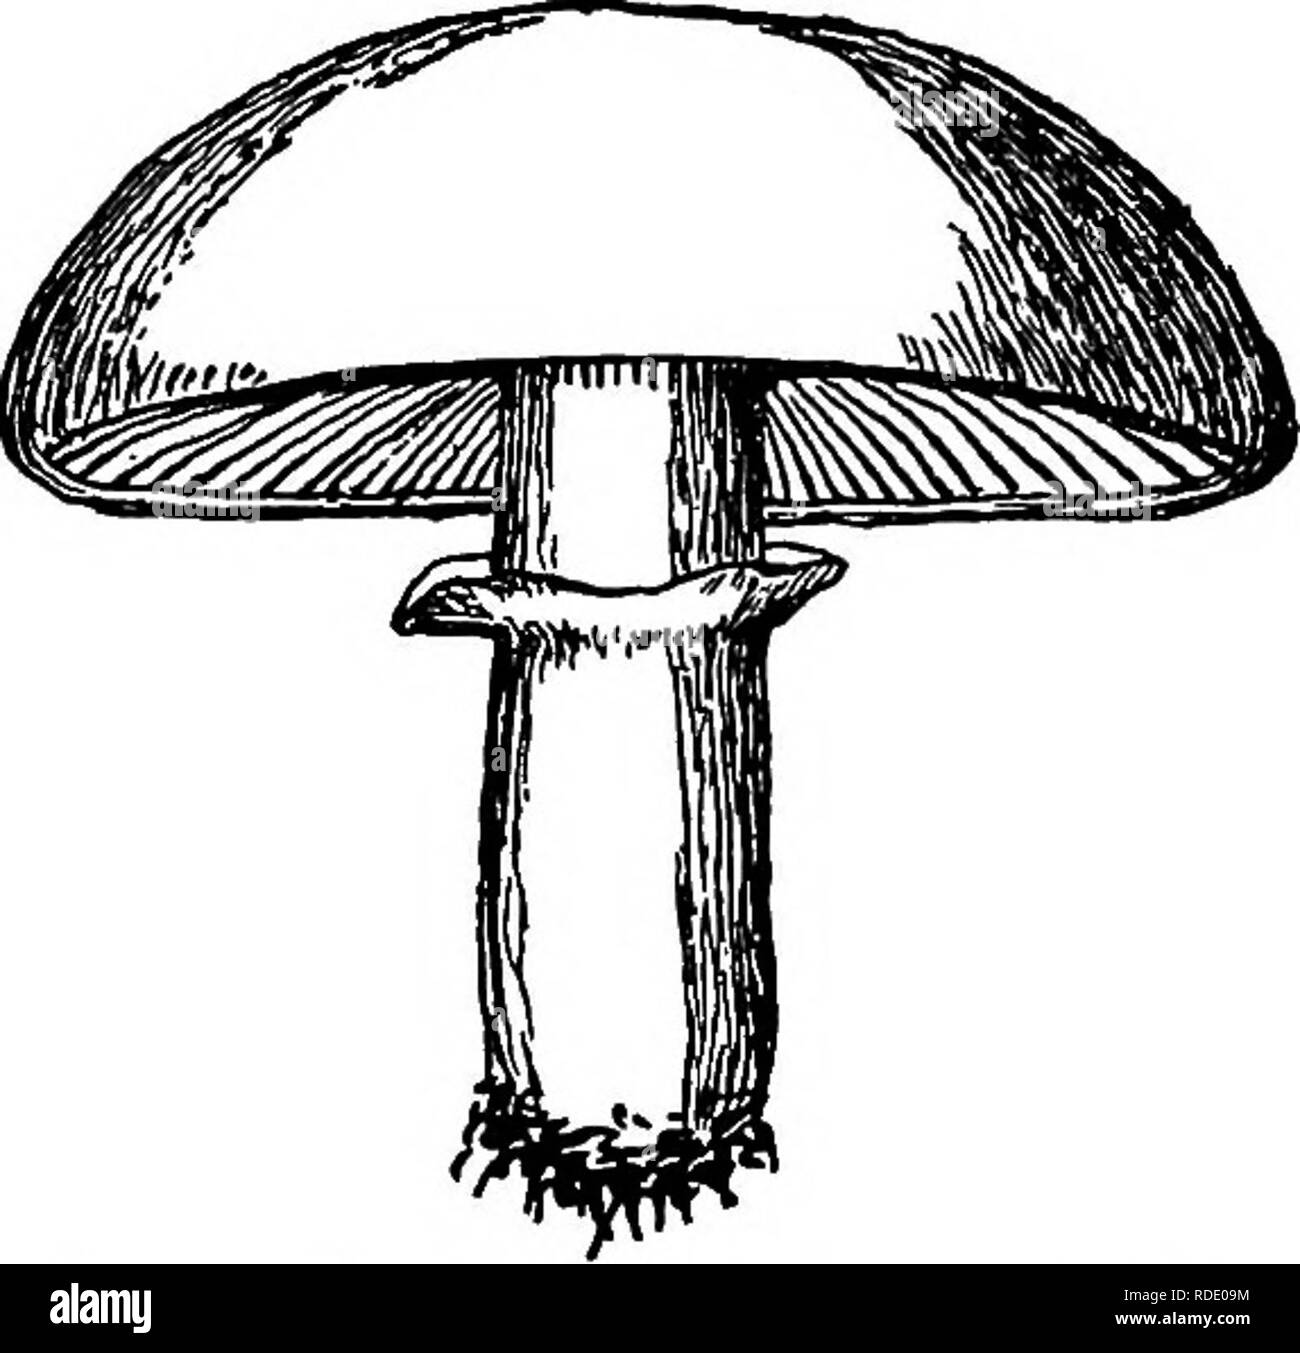 . Mushrooms and their use . Mushrooms. VII. THE COMMON MUSHROOM—ITS EELATIVES. ANALYTICAL TABLE OF AGAEICUS. 1. 4. 2. 3. 2. 4. 6. Plants gro-nang in pastures or open places, Plants grov/ing in woods and groves or their borders, 1. Stem stuffed or solid, 1. Stem hollow, 2. Gills at first pinkish, about as wide as the thickness of the cap, A. campester. Gills at first whitish, narrower than the thickness of the cap, A. rodmani. 3. The collar radiately tomentose on the lower sur- face, A. arvensis, 3. The collar evenly flocculose on the lower STir- face, A. subrufescens. The flesh quickly changin Stock Photo